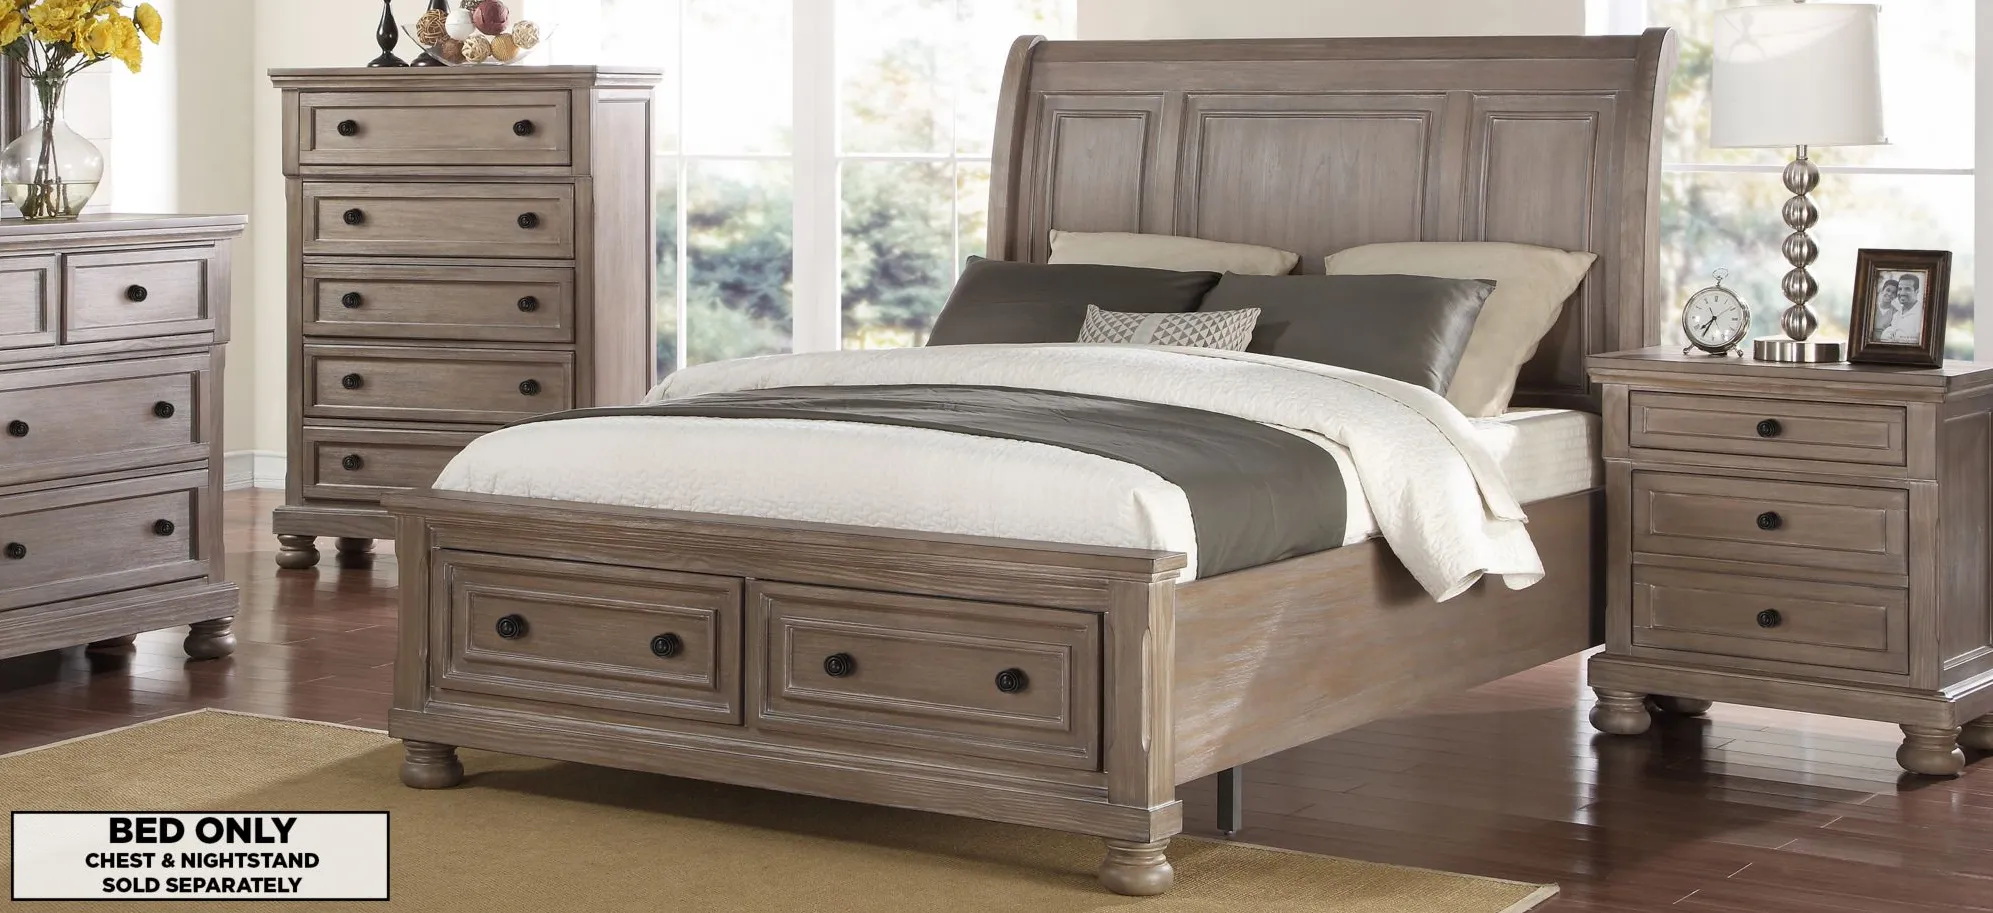 Allegra Storage Bed in Pewter by New Classic Home Furnishings